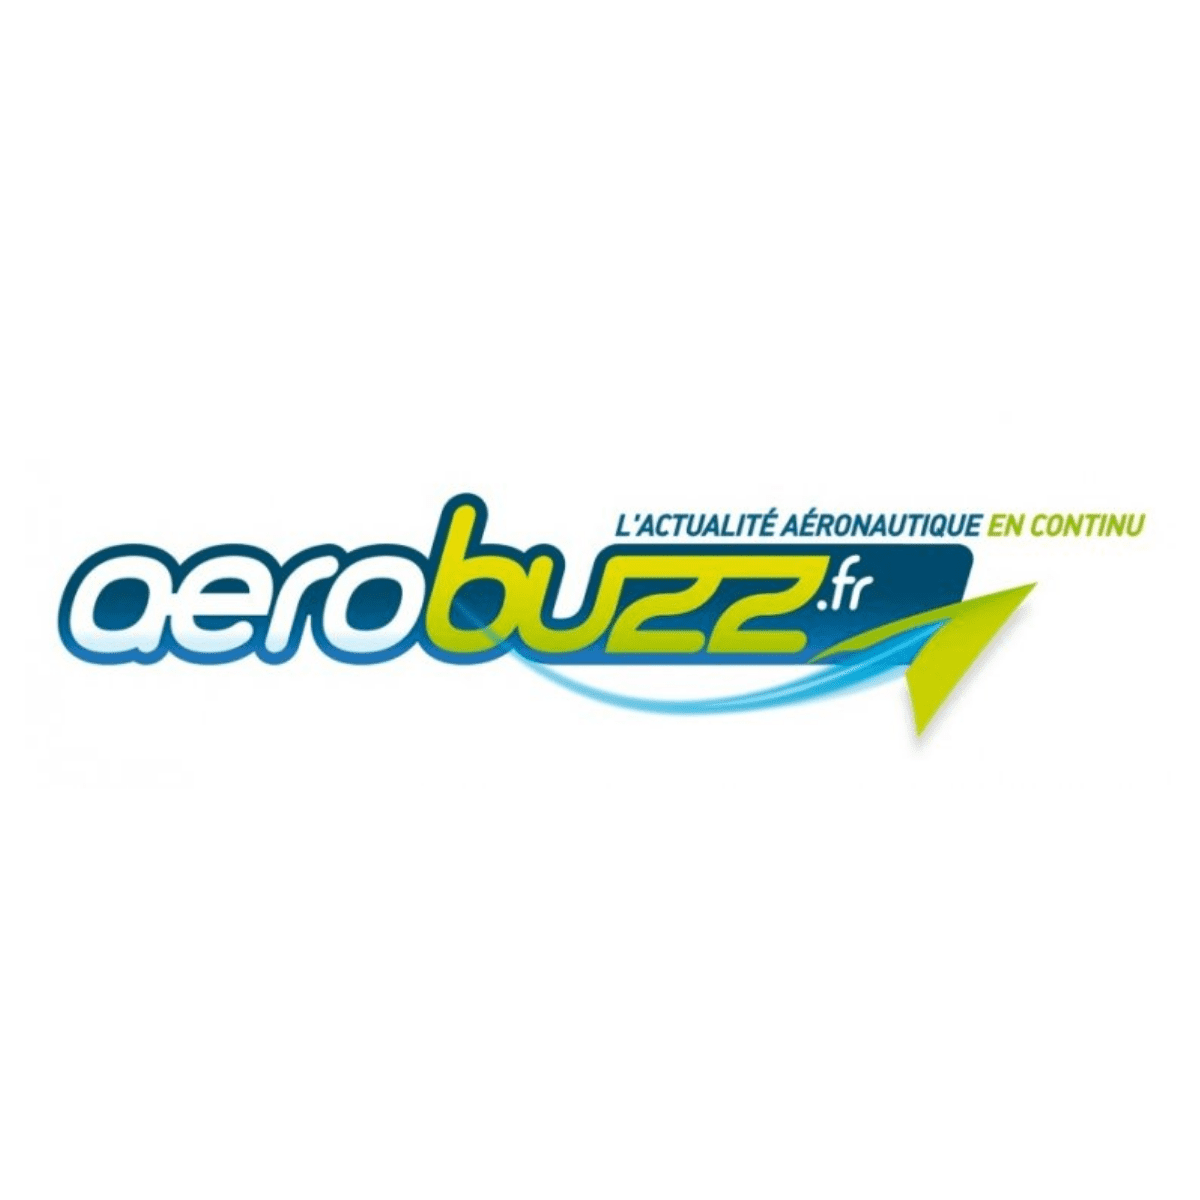 Aeronautic fly test paint for aircraft maintenance MRO, Aerobuzz talks about CorsoPatch Aircraft